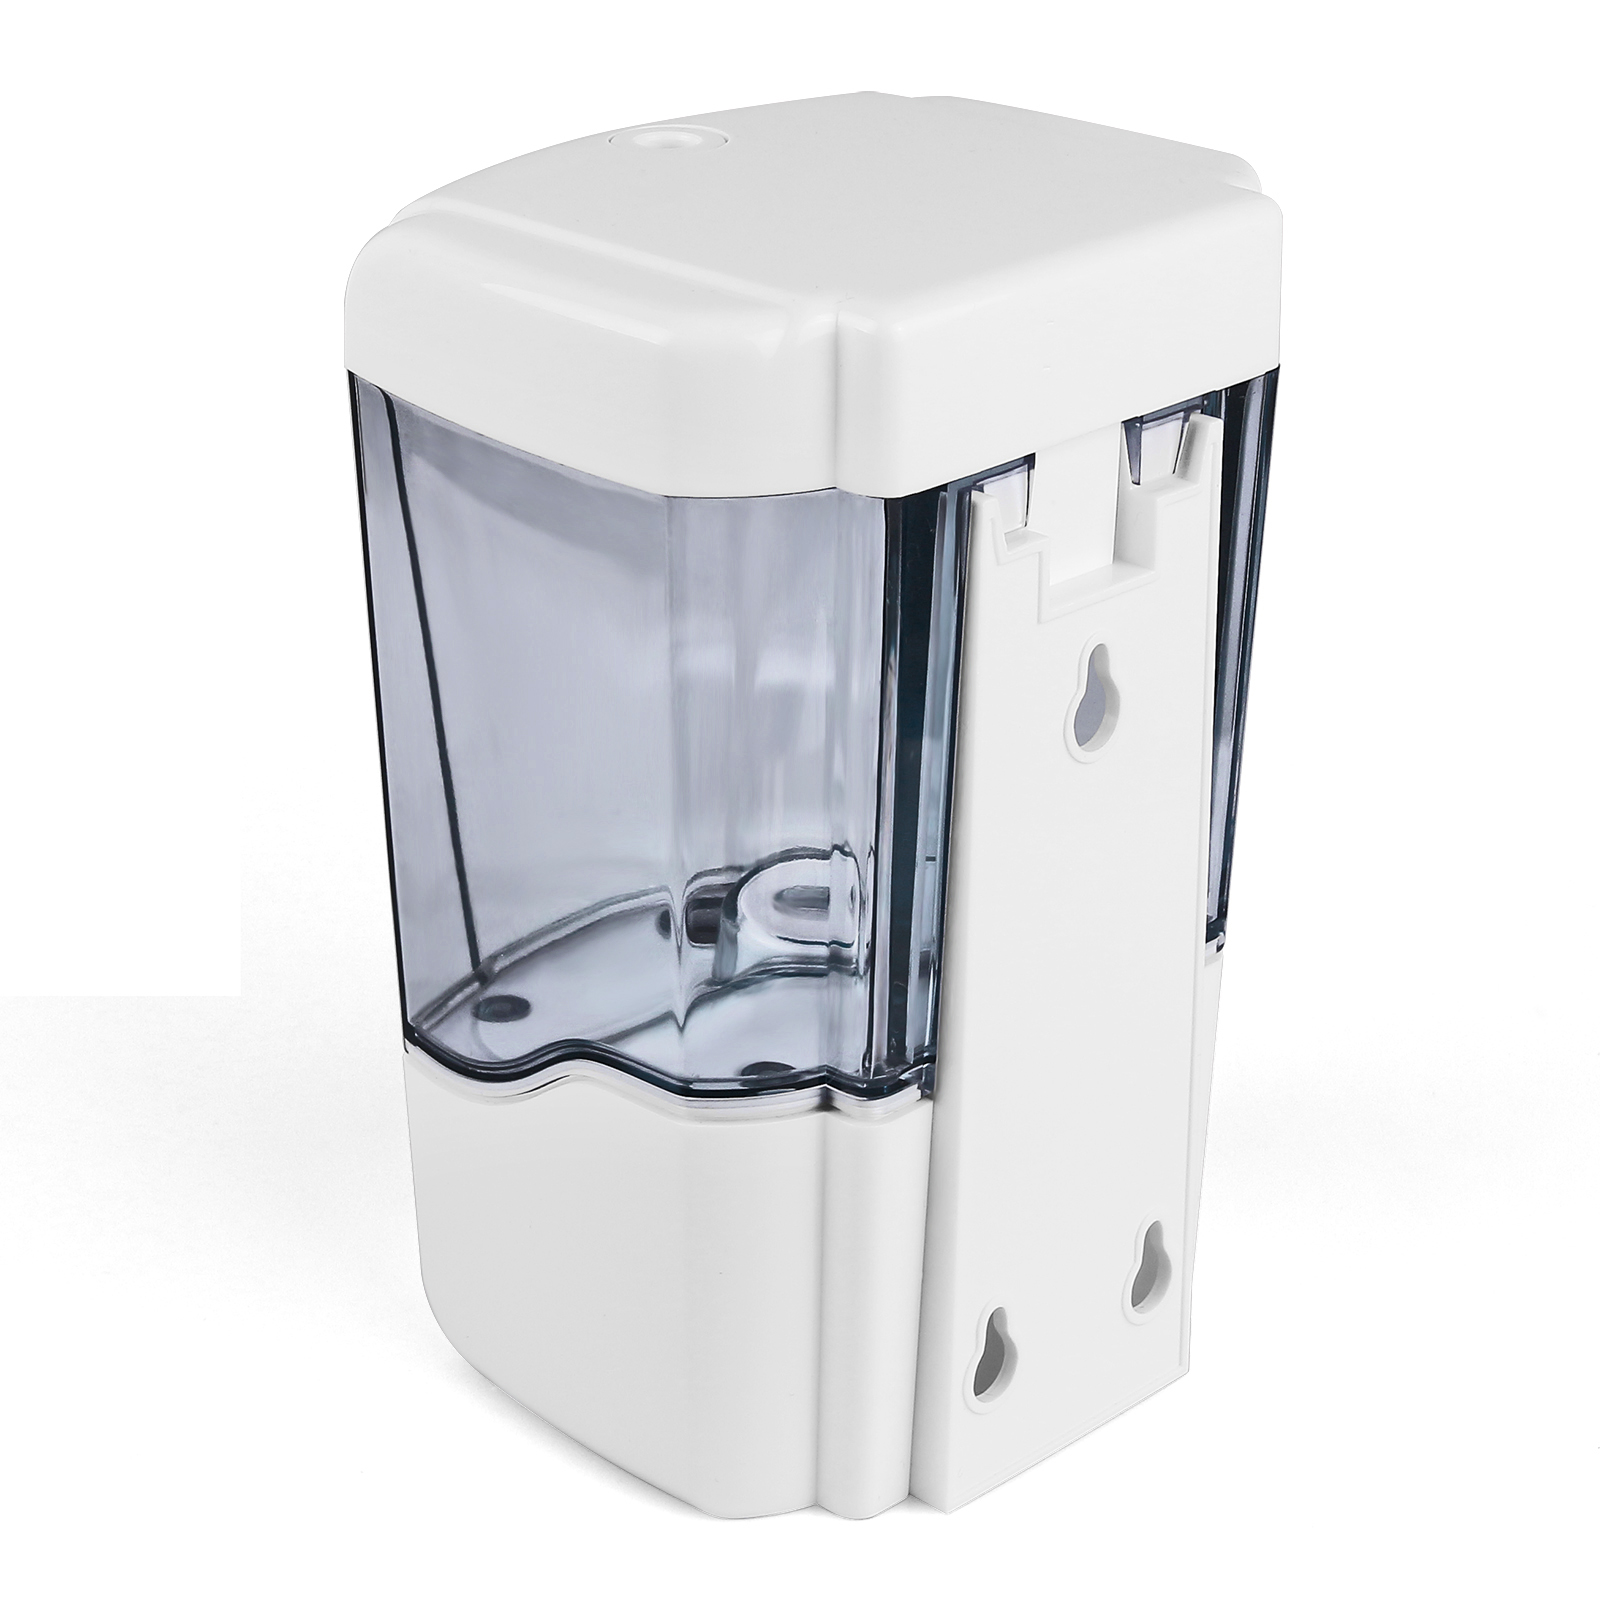 Sanitizer dispenser with temperature reader - Magic Wand Company